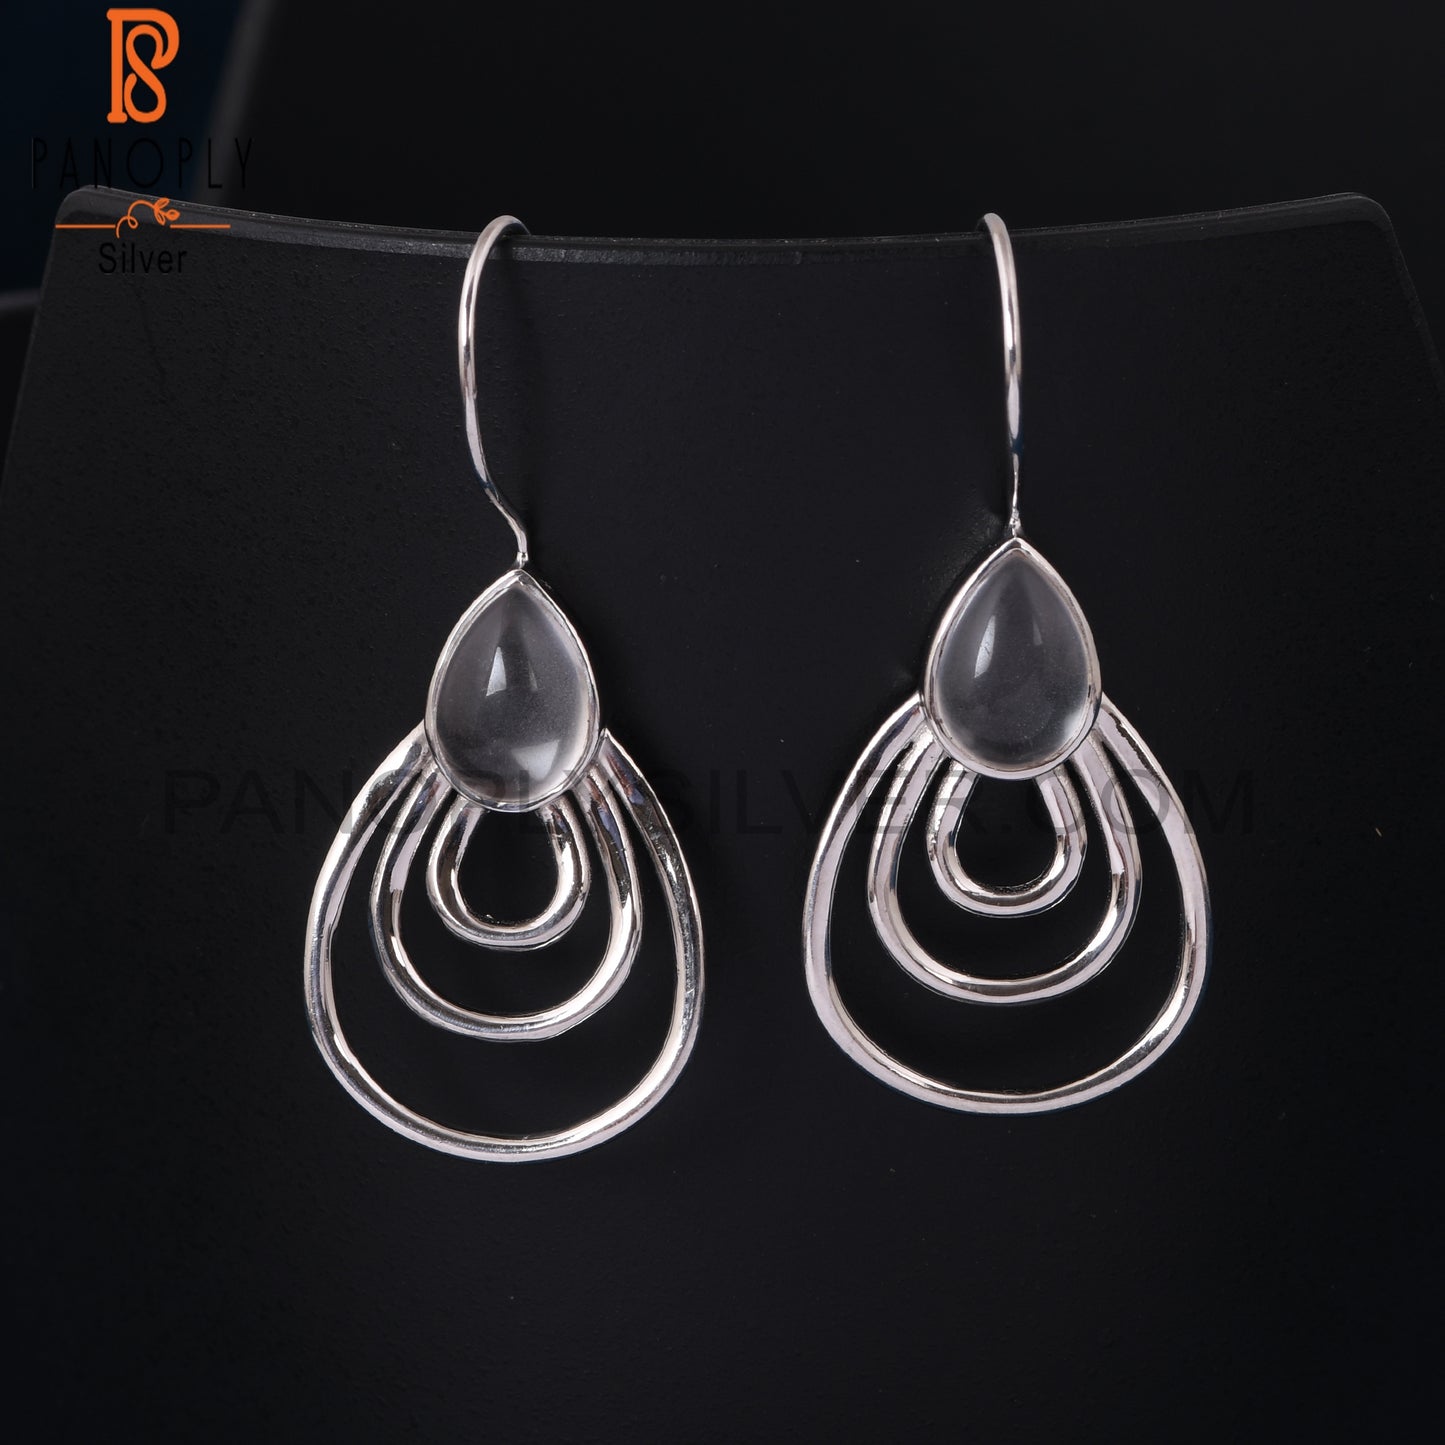 Crystal Quartz 925 Silver White Rhodium Plated Earrings Jewelry